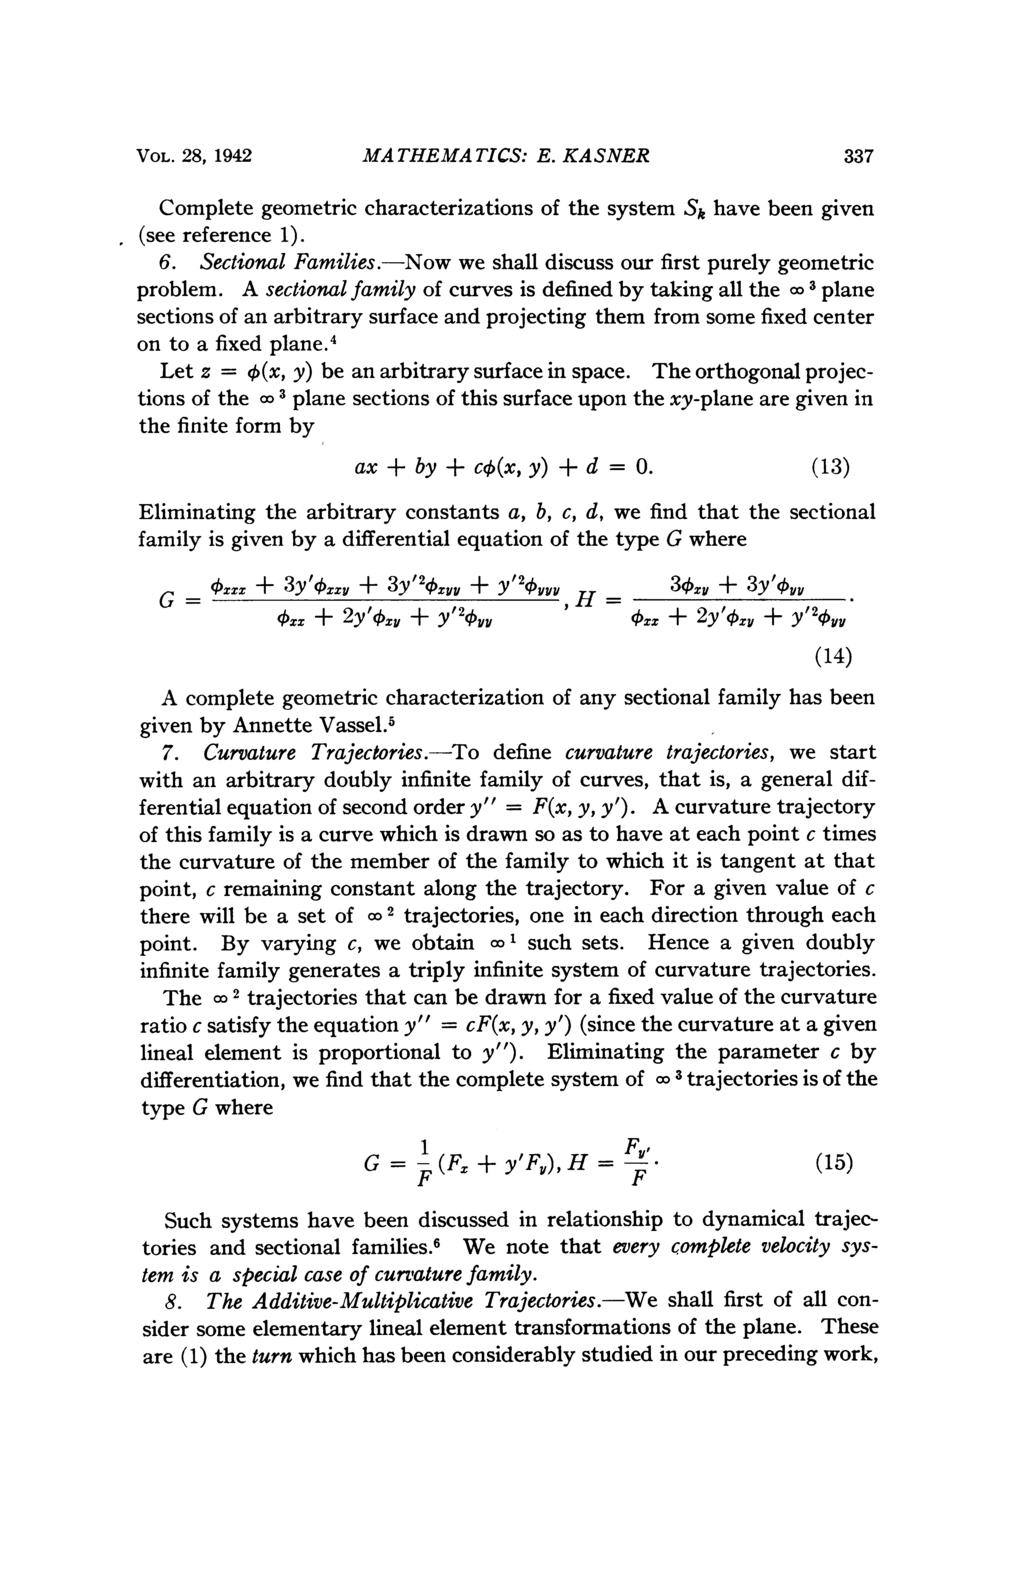 VOL. 28, 1942 MA THEMA TICS: E. KA SNER 337 Complete geometric characterizations of the system Sk have been given (see reference 1). 6. Sectional Families.